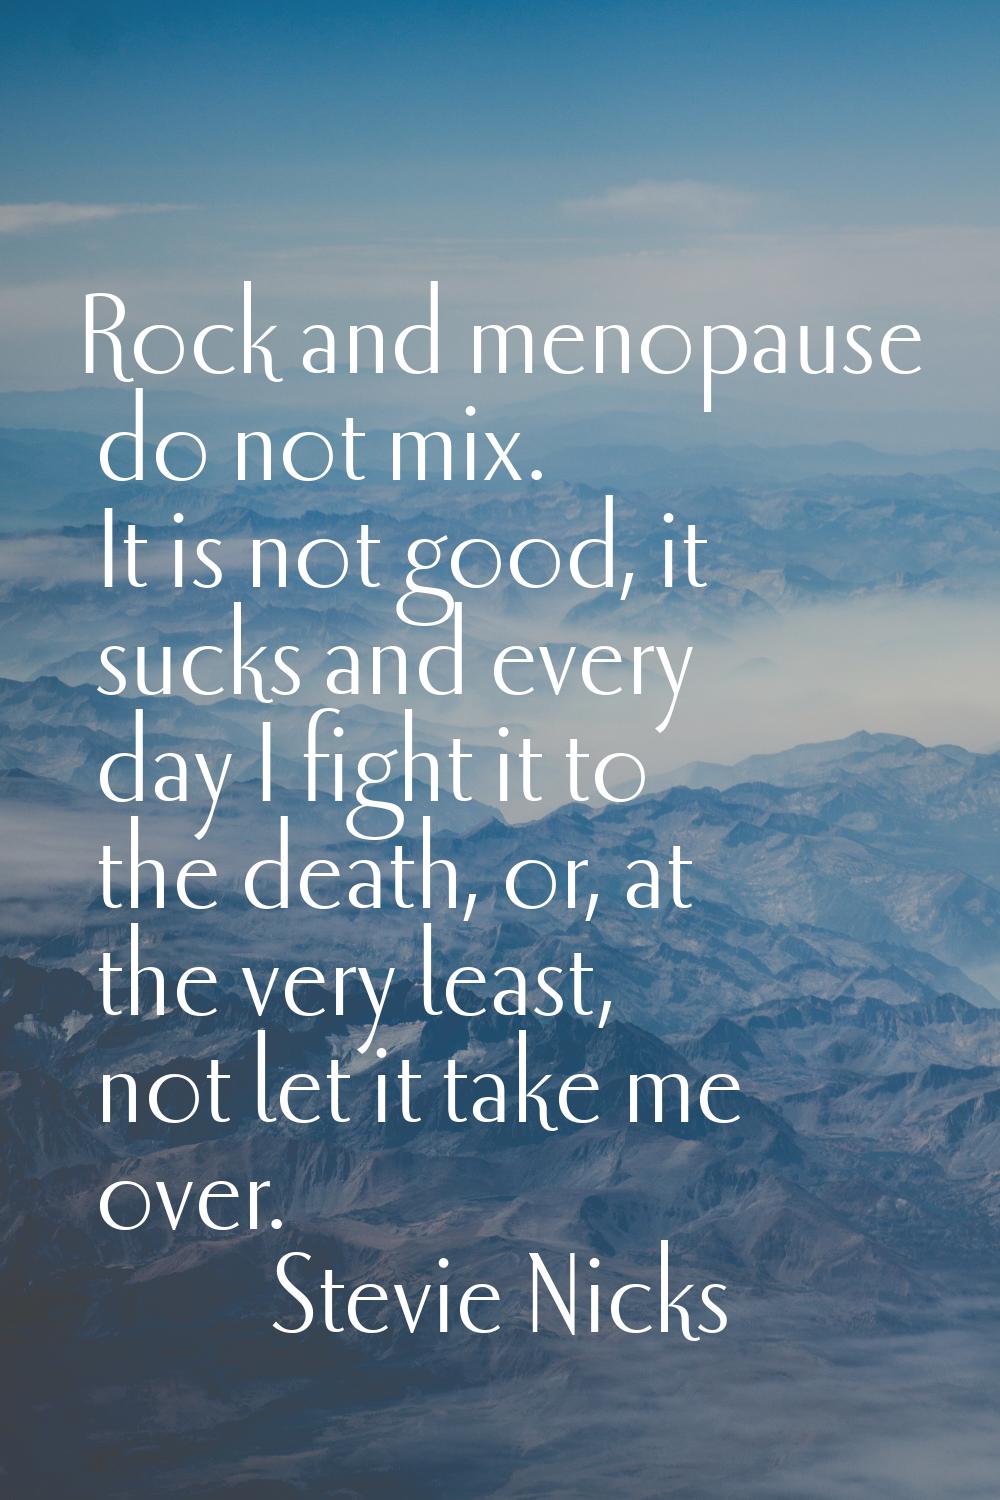 Rock and menopause do not mix. It is not good, it sucks and every day I fight it to the death, or, 